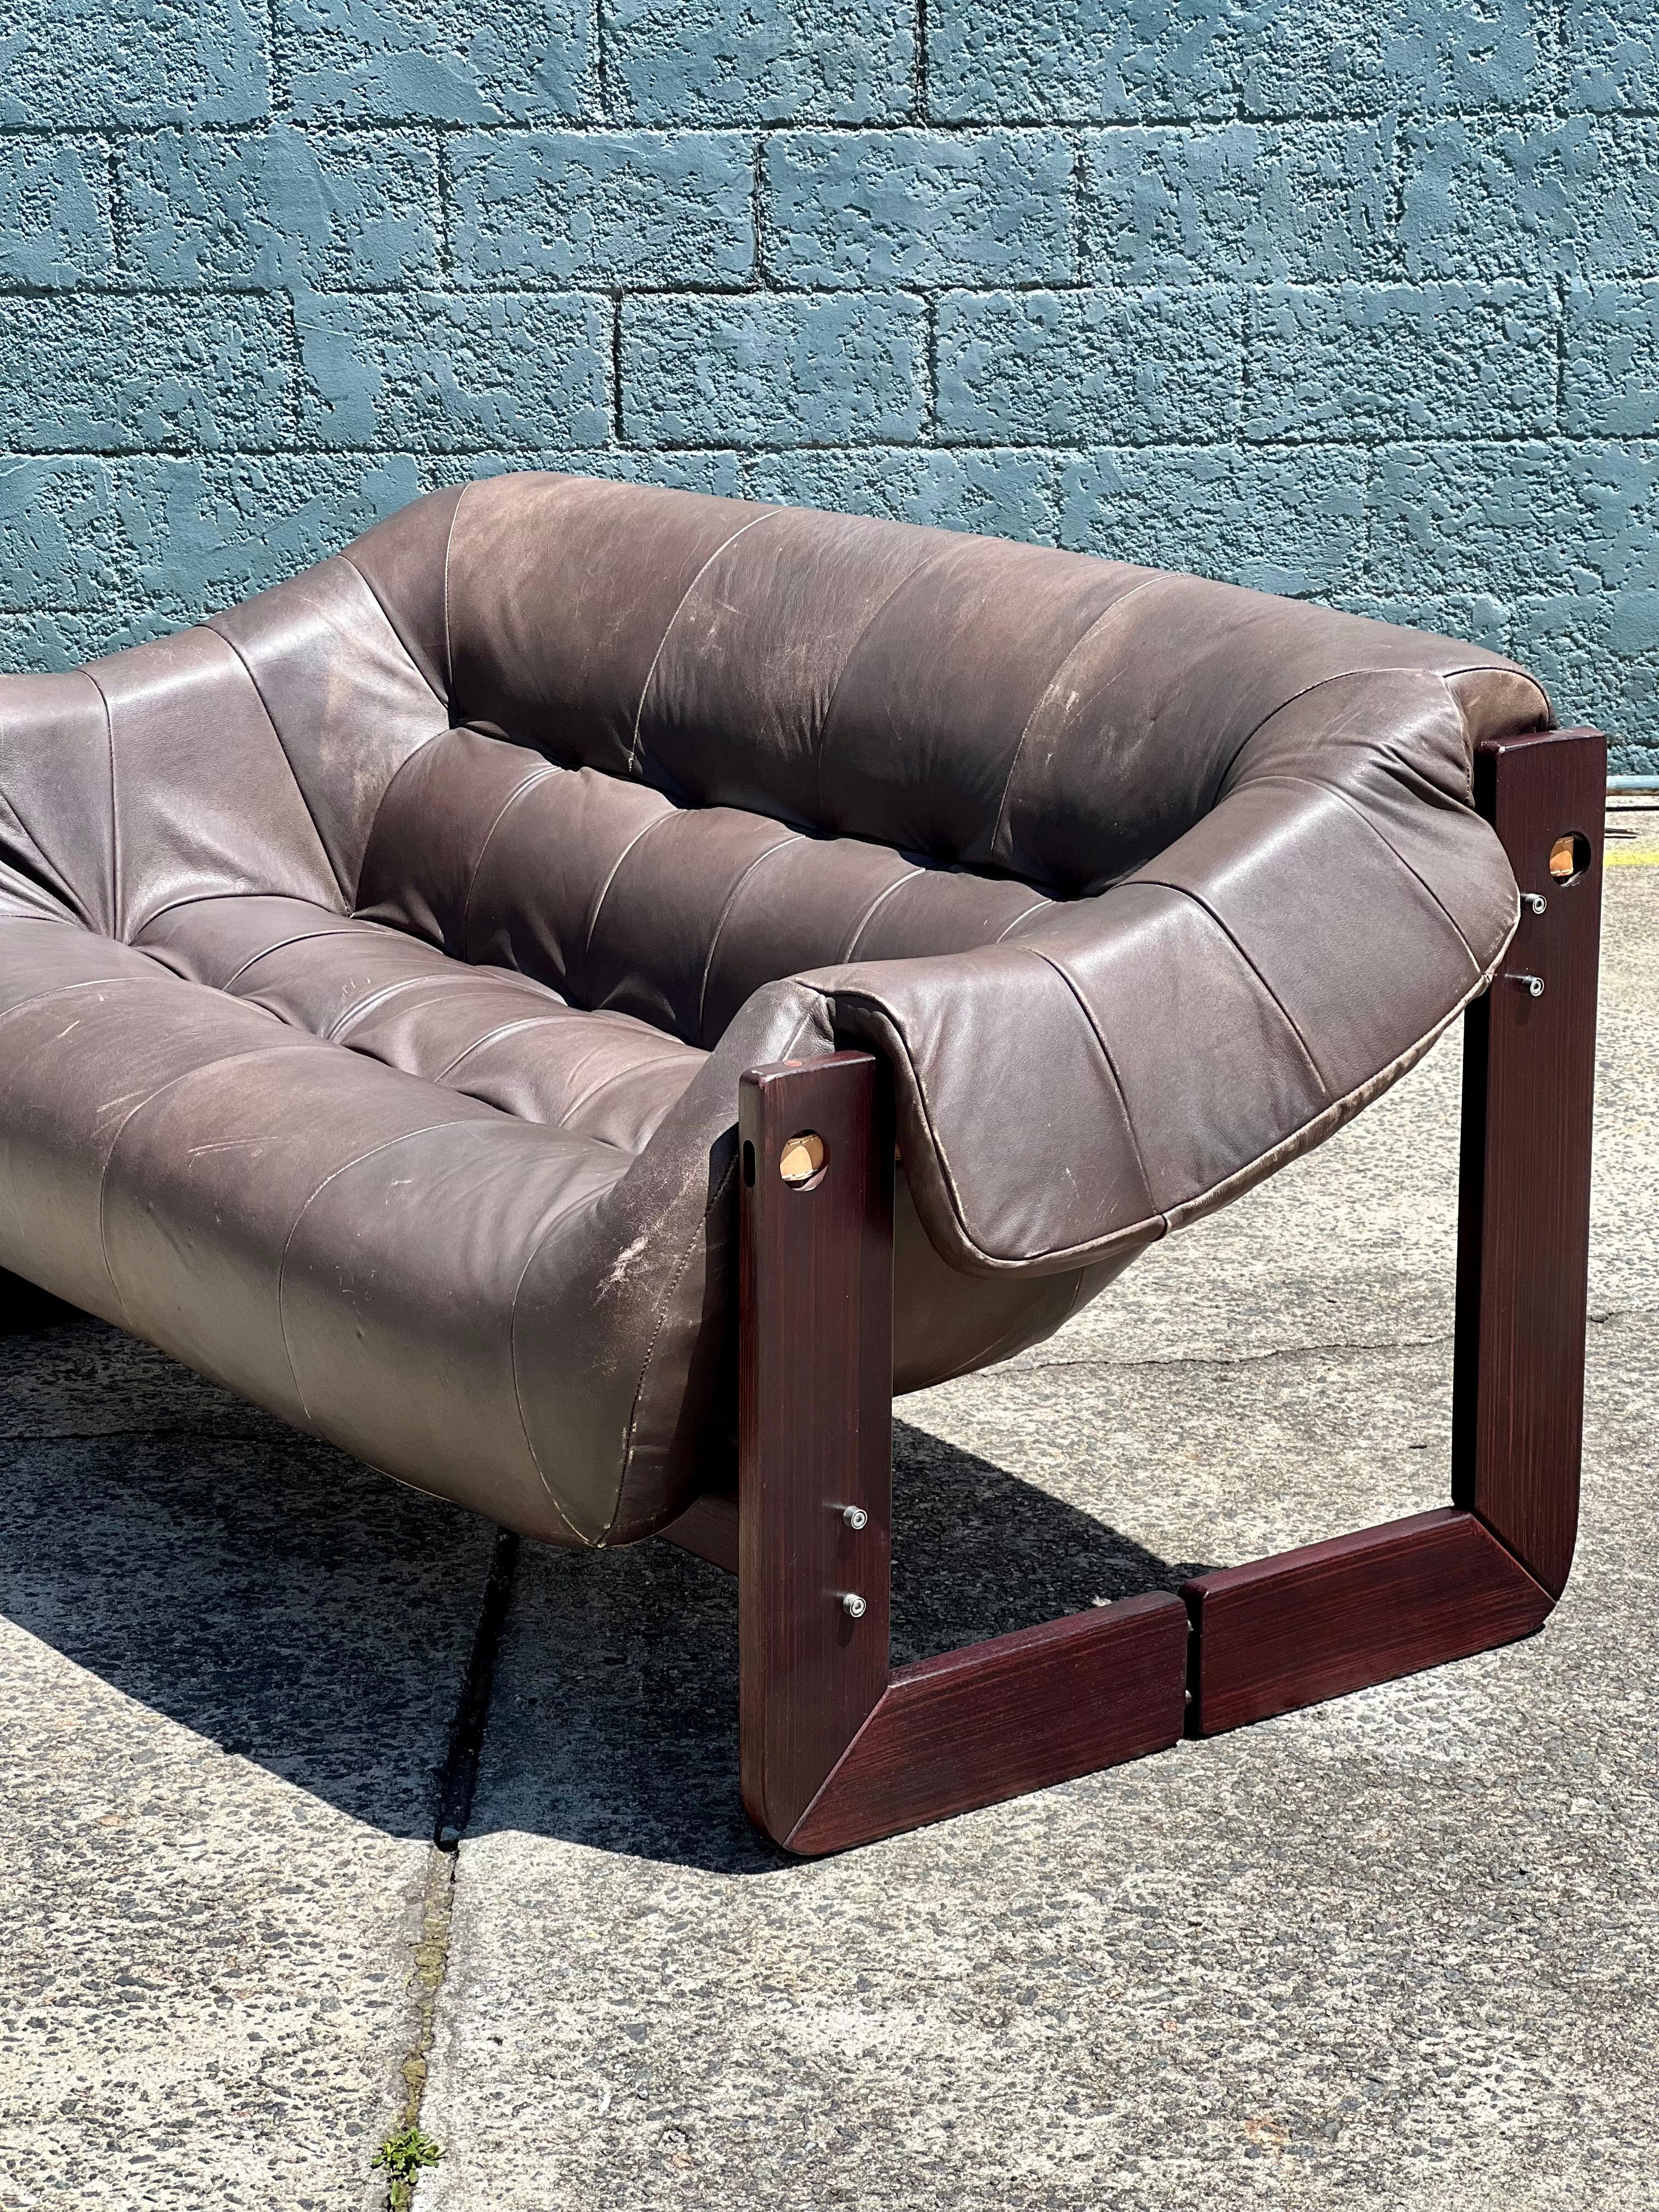 Late 20th Century Vintage MP-97 Percival Lafer Loveseat 2-Seater Sofa